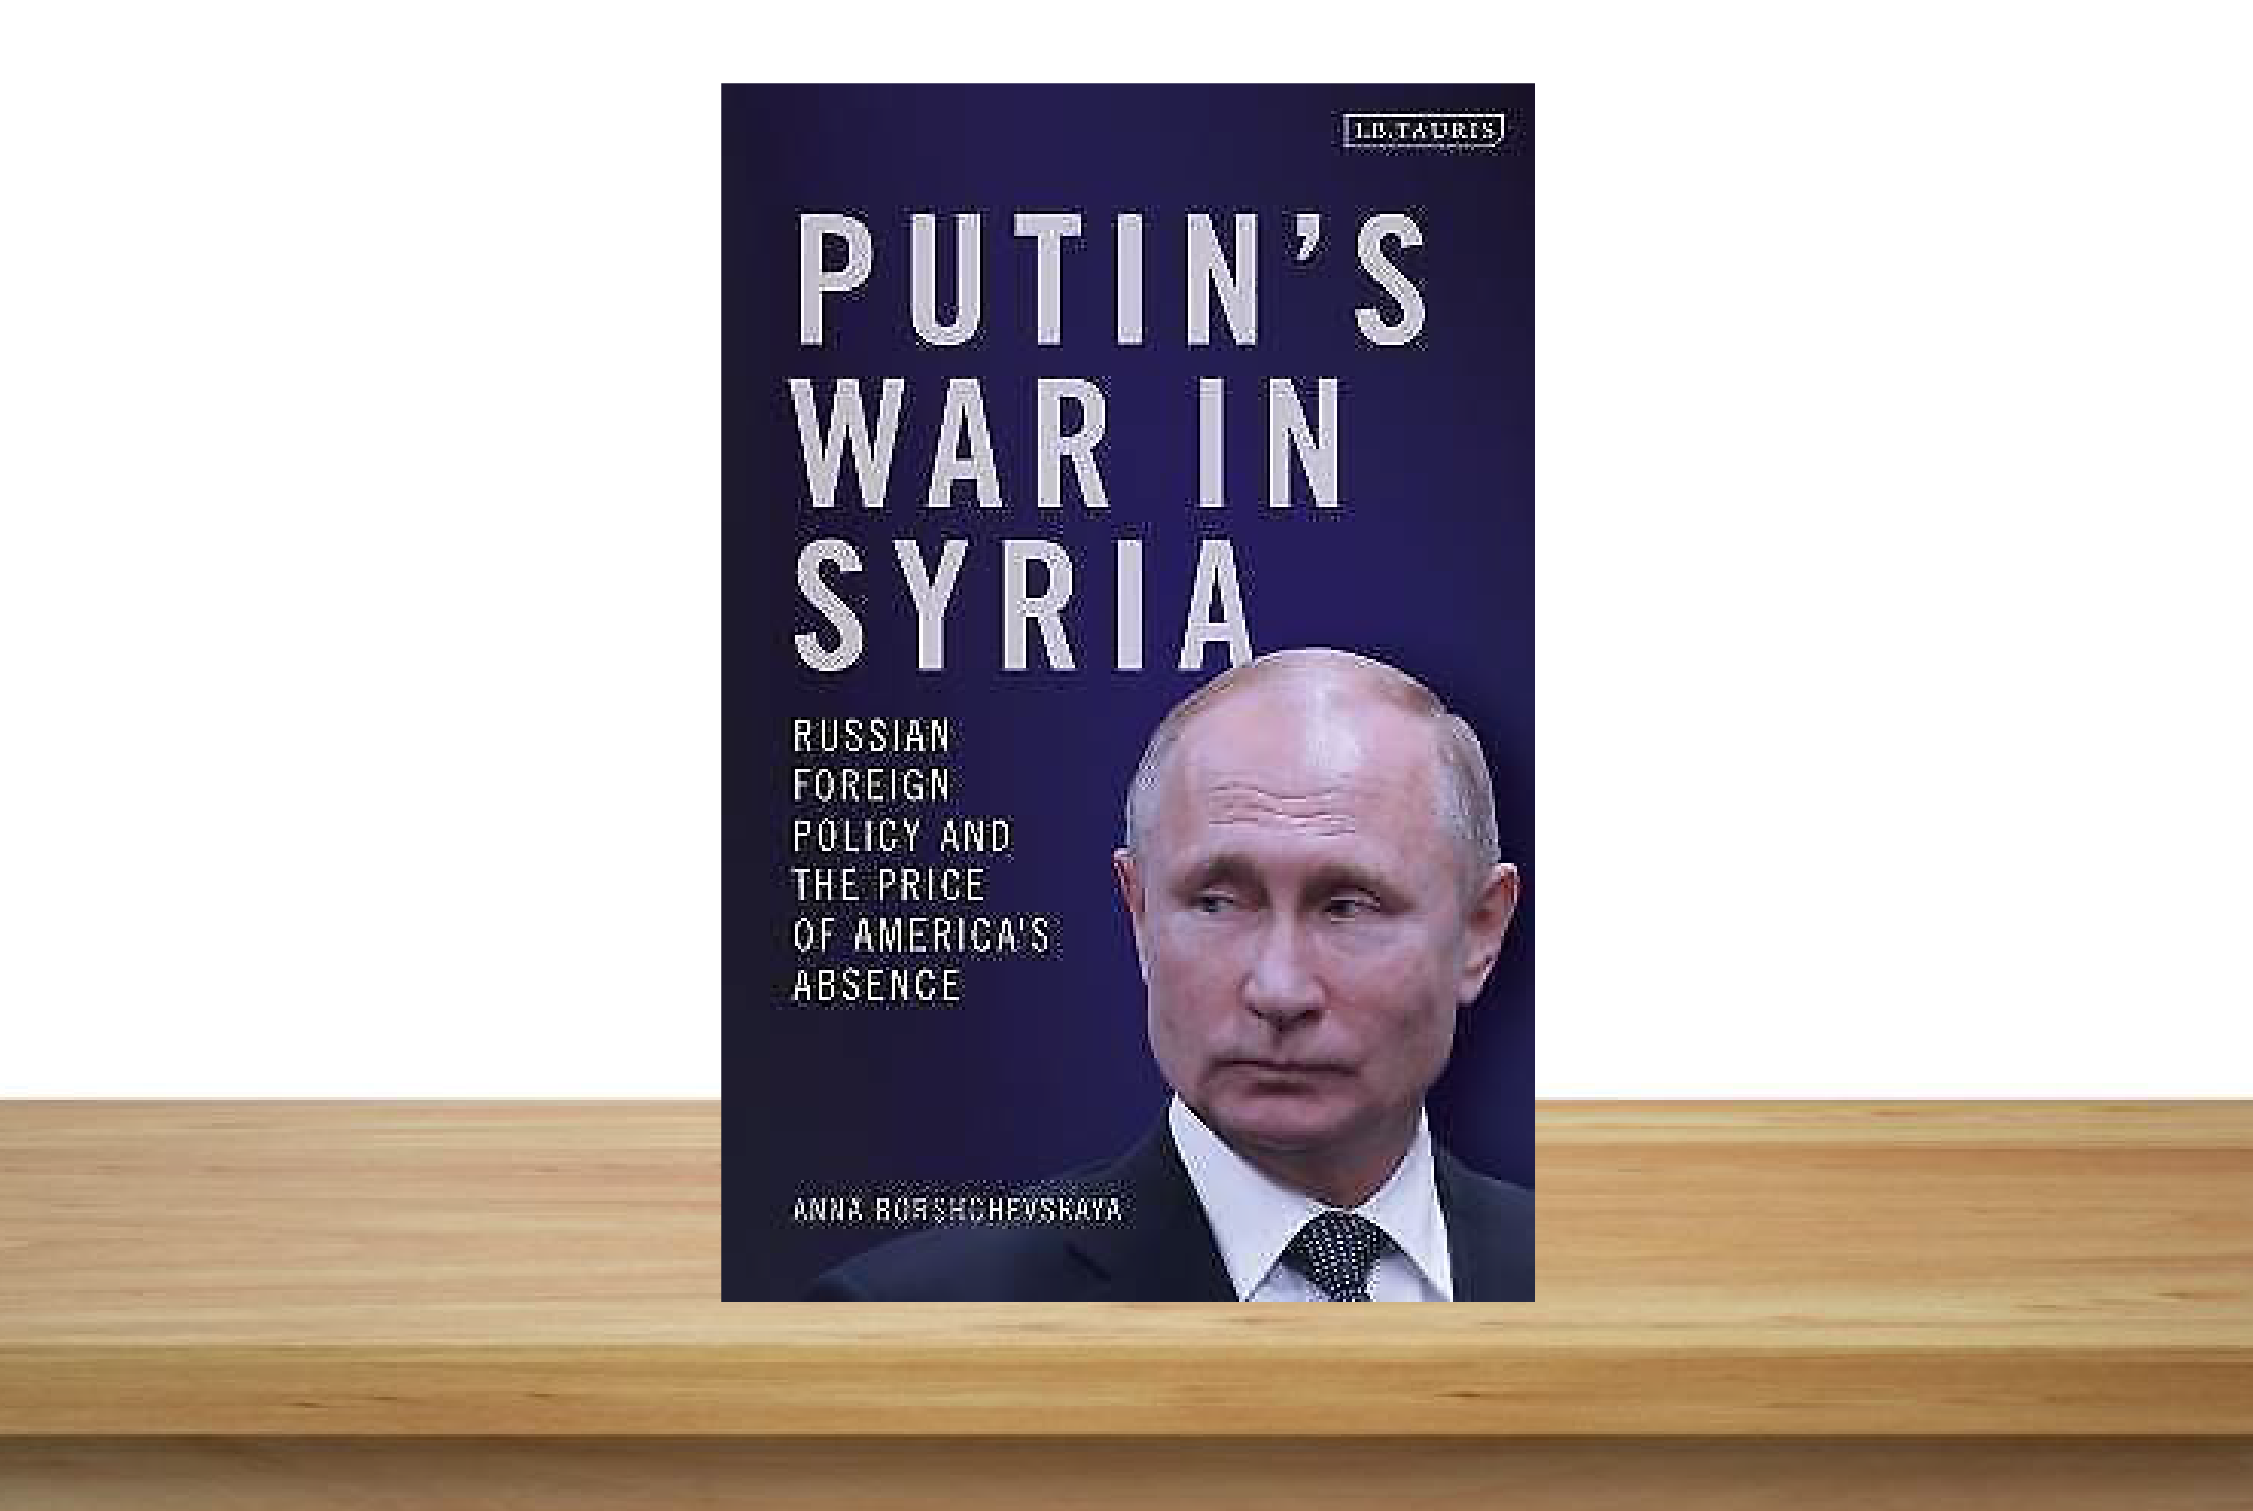 Book Review: “Putin’s War in Syria: Russian Foreign Policy and the Price of America’s Absence” by Anna Borshchevskaya